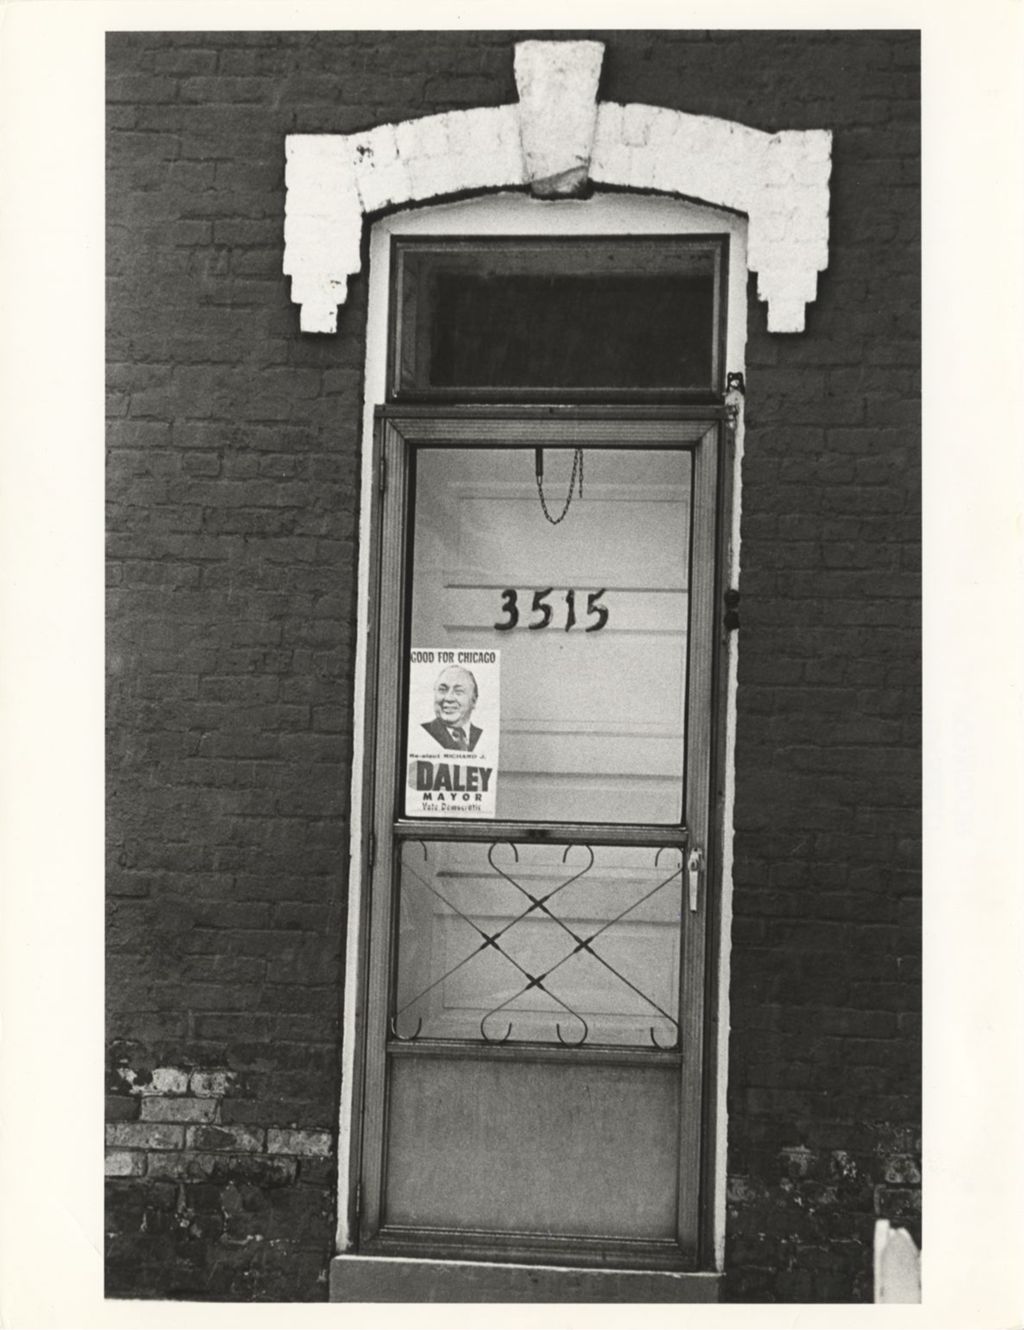 Daley campaign poster on door